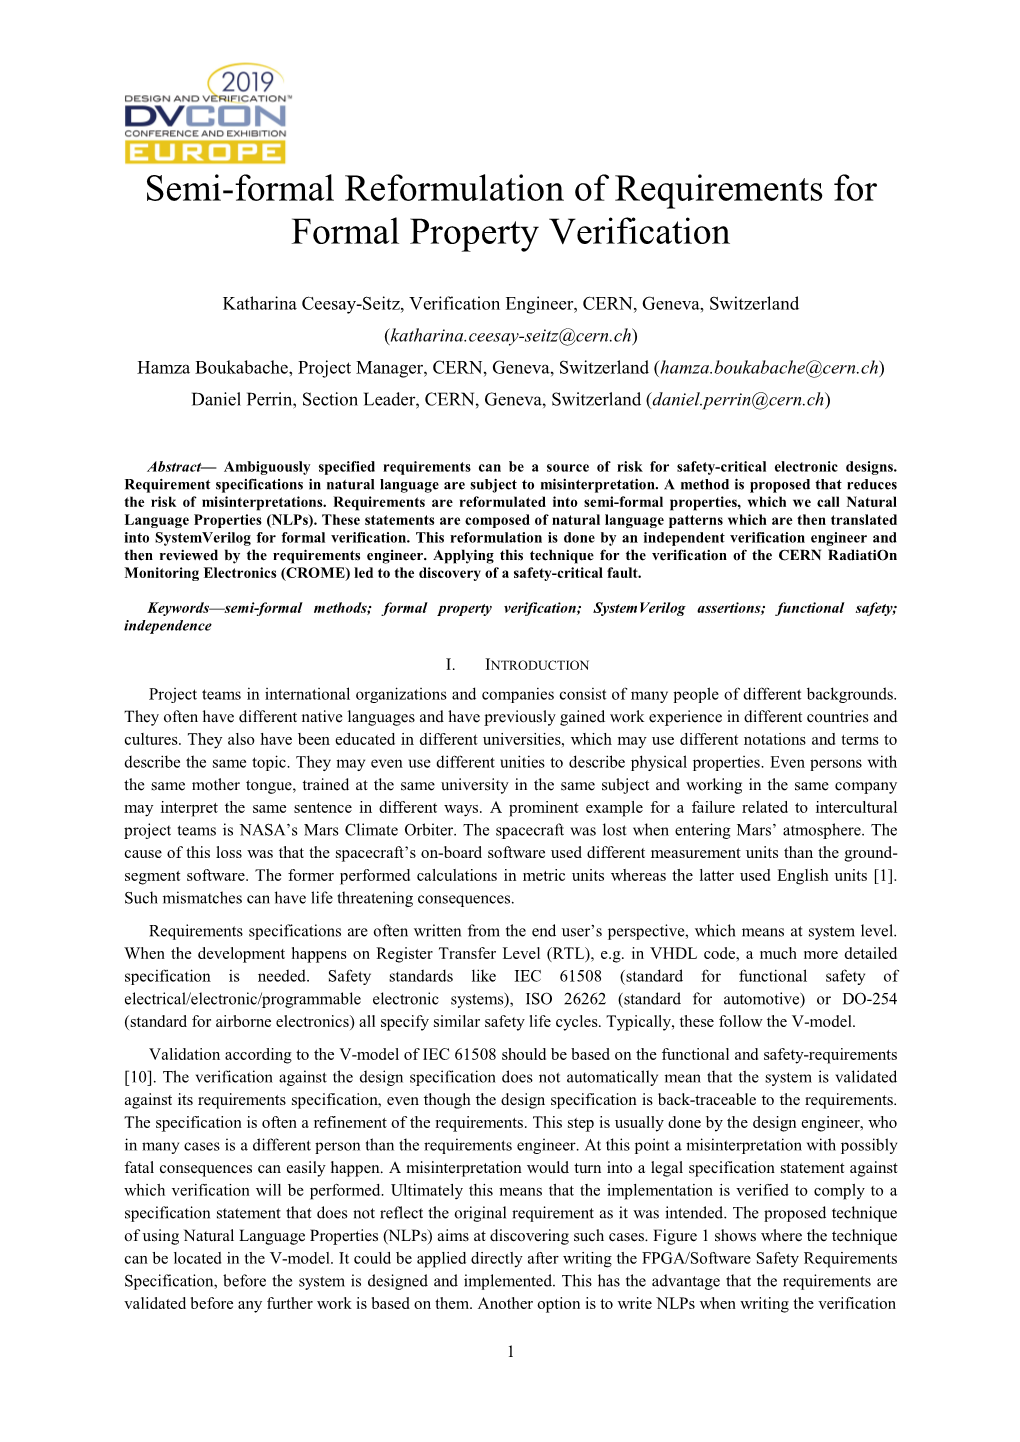 Semi-Formal Reformulation of Requirements for Formal Property Verification